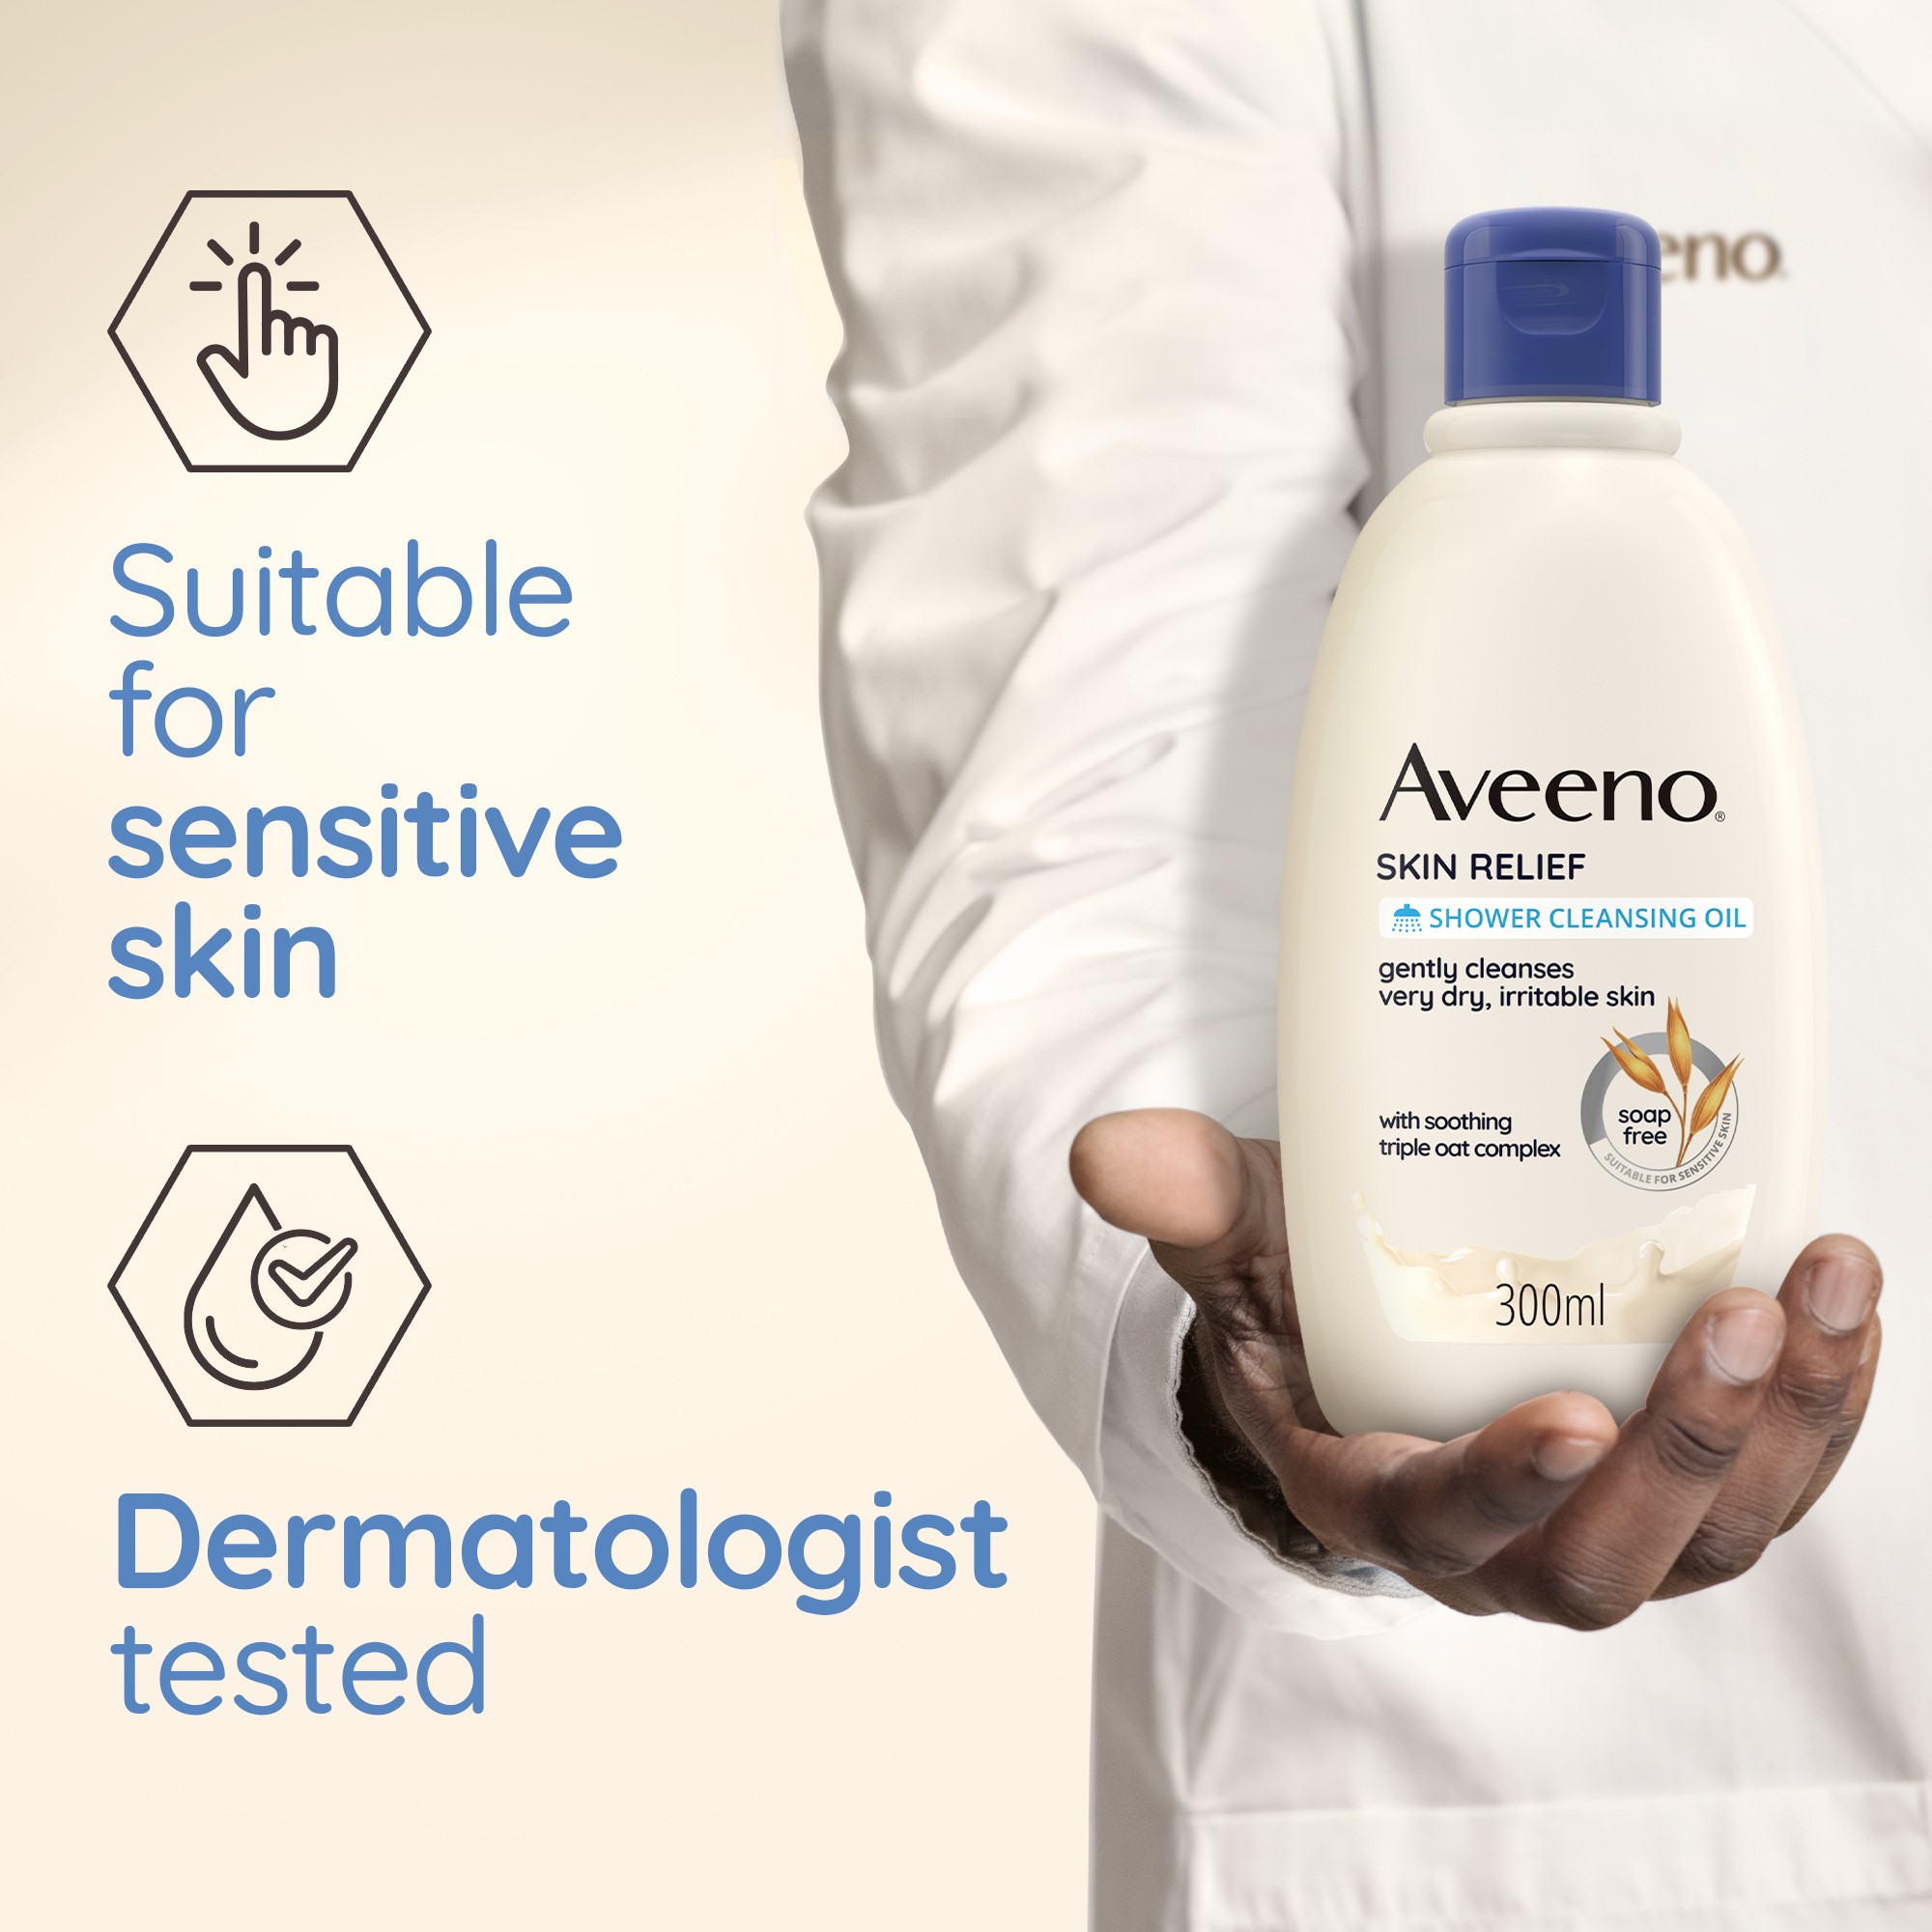 Suitable for sensitive skin and dermatologist tested